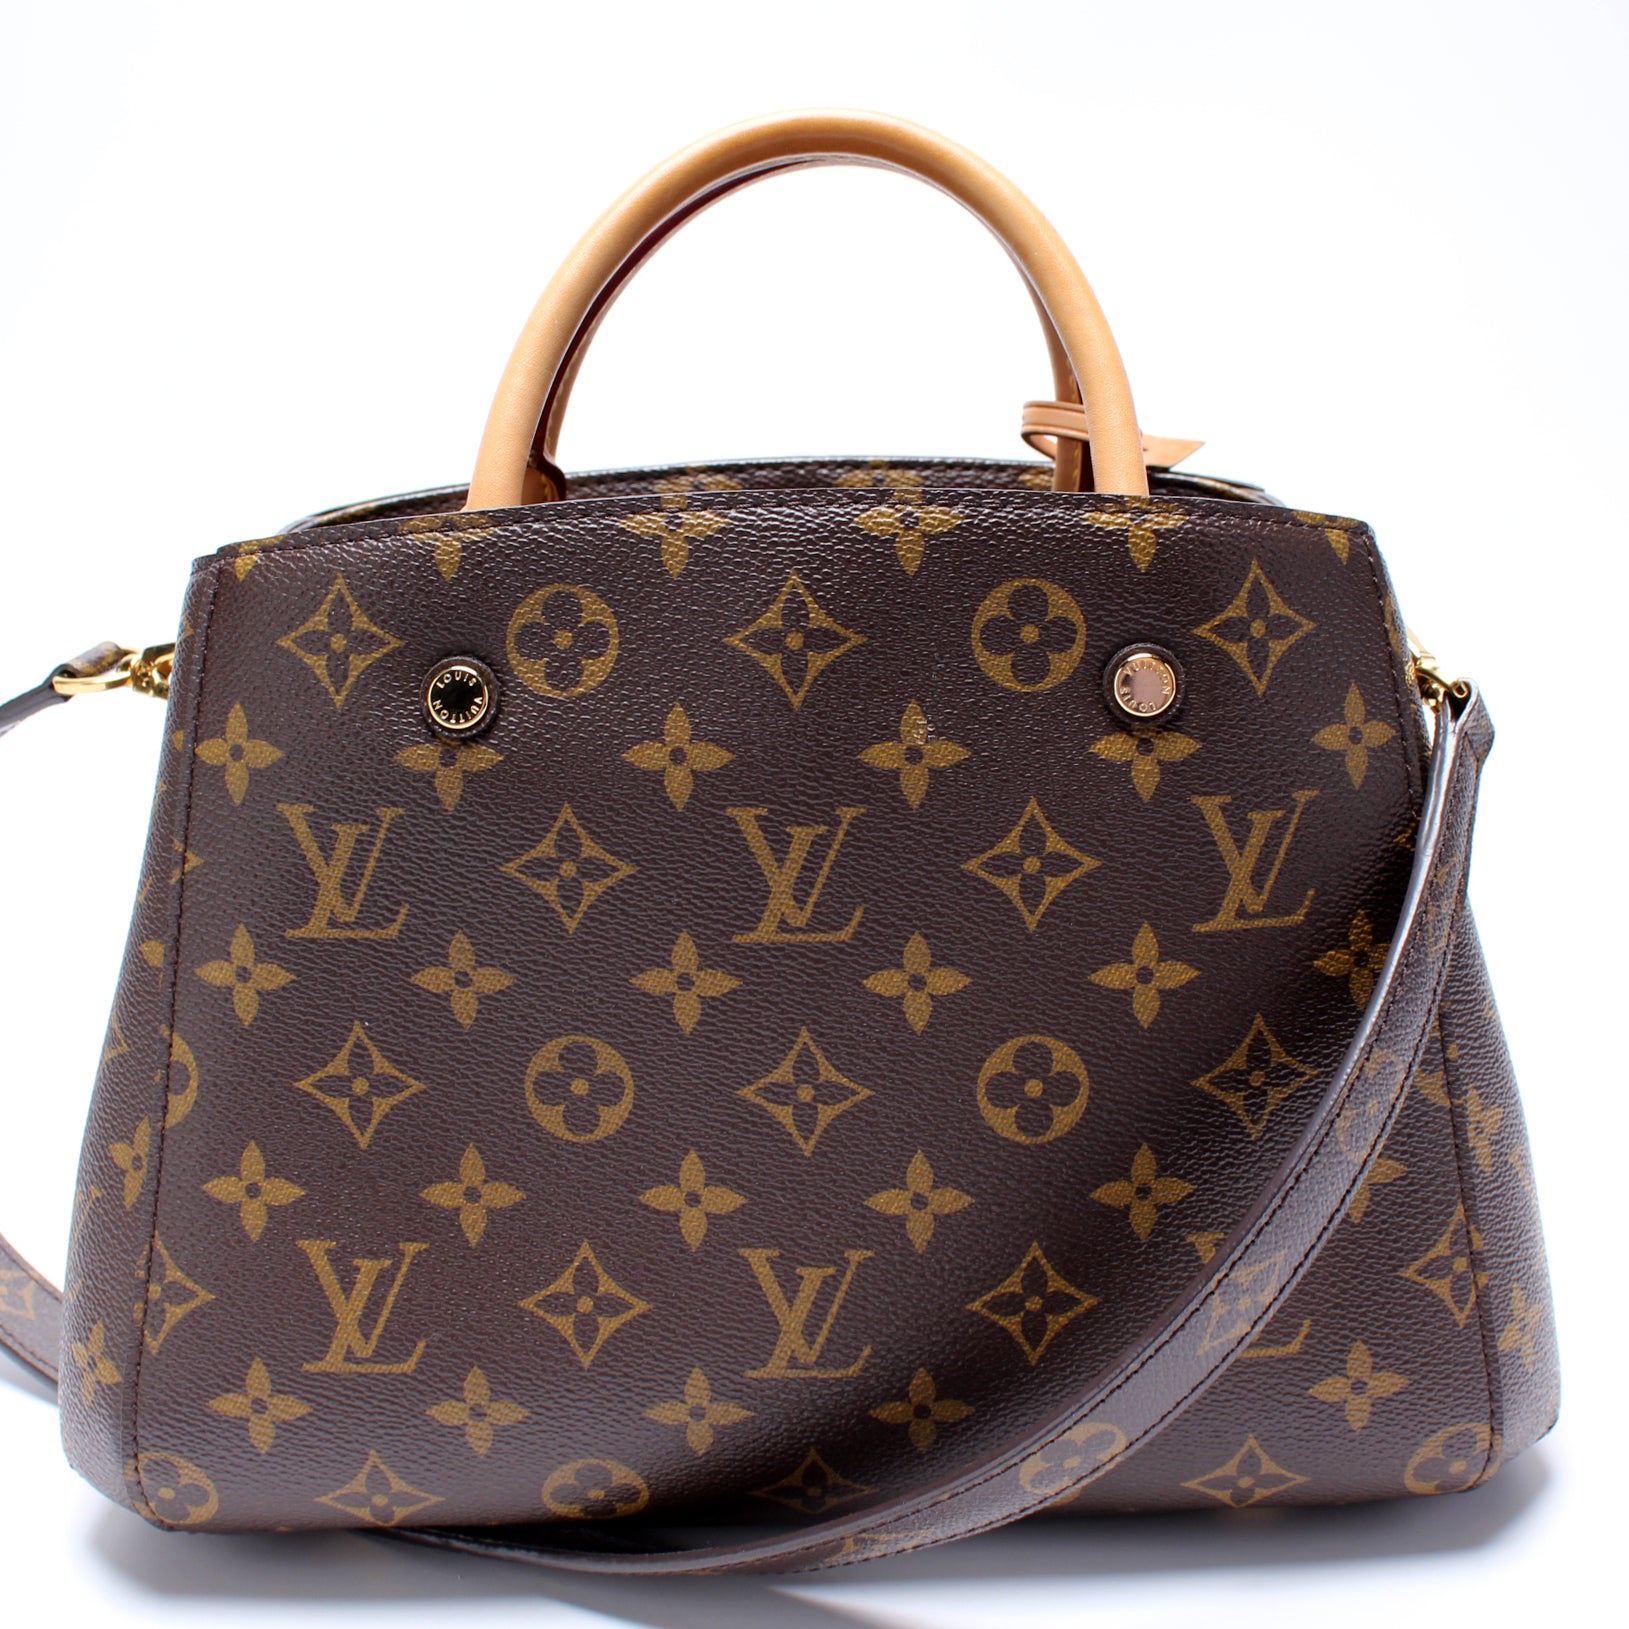 UPDATED* REVIEW OF THE LOUIS VUITTON MONTAIGNE BB IN MONOGRAM